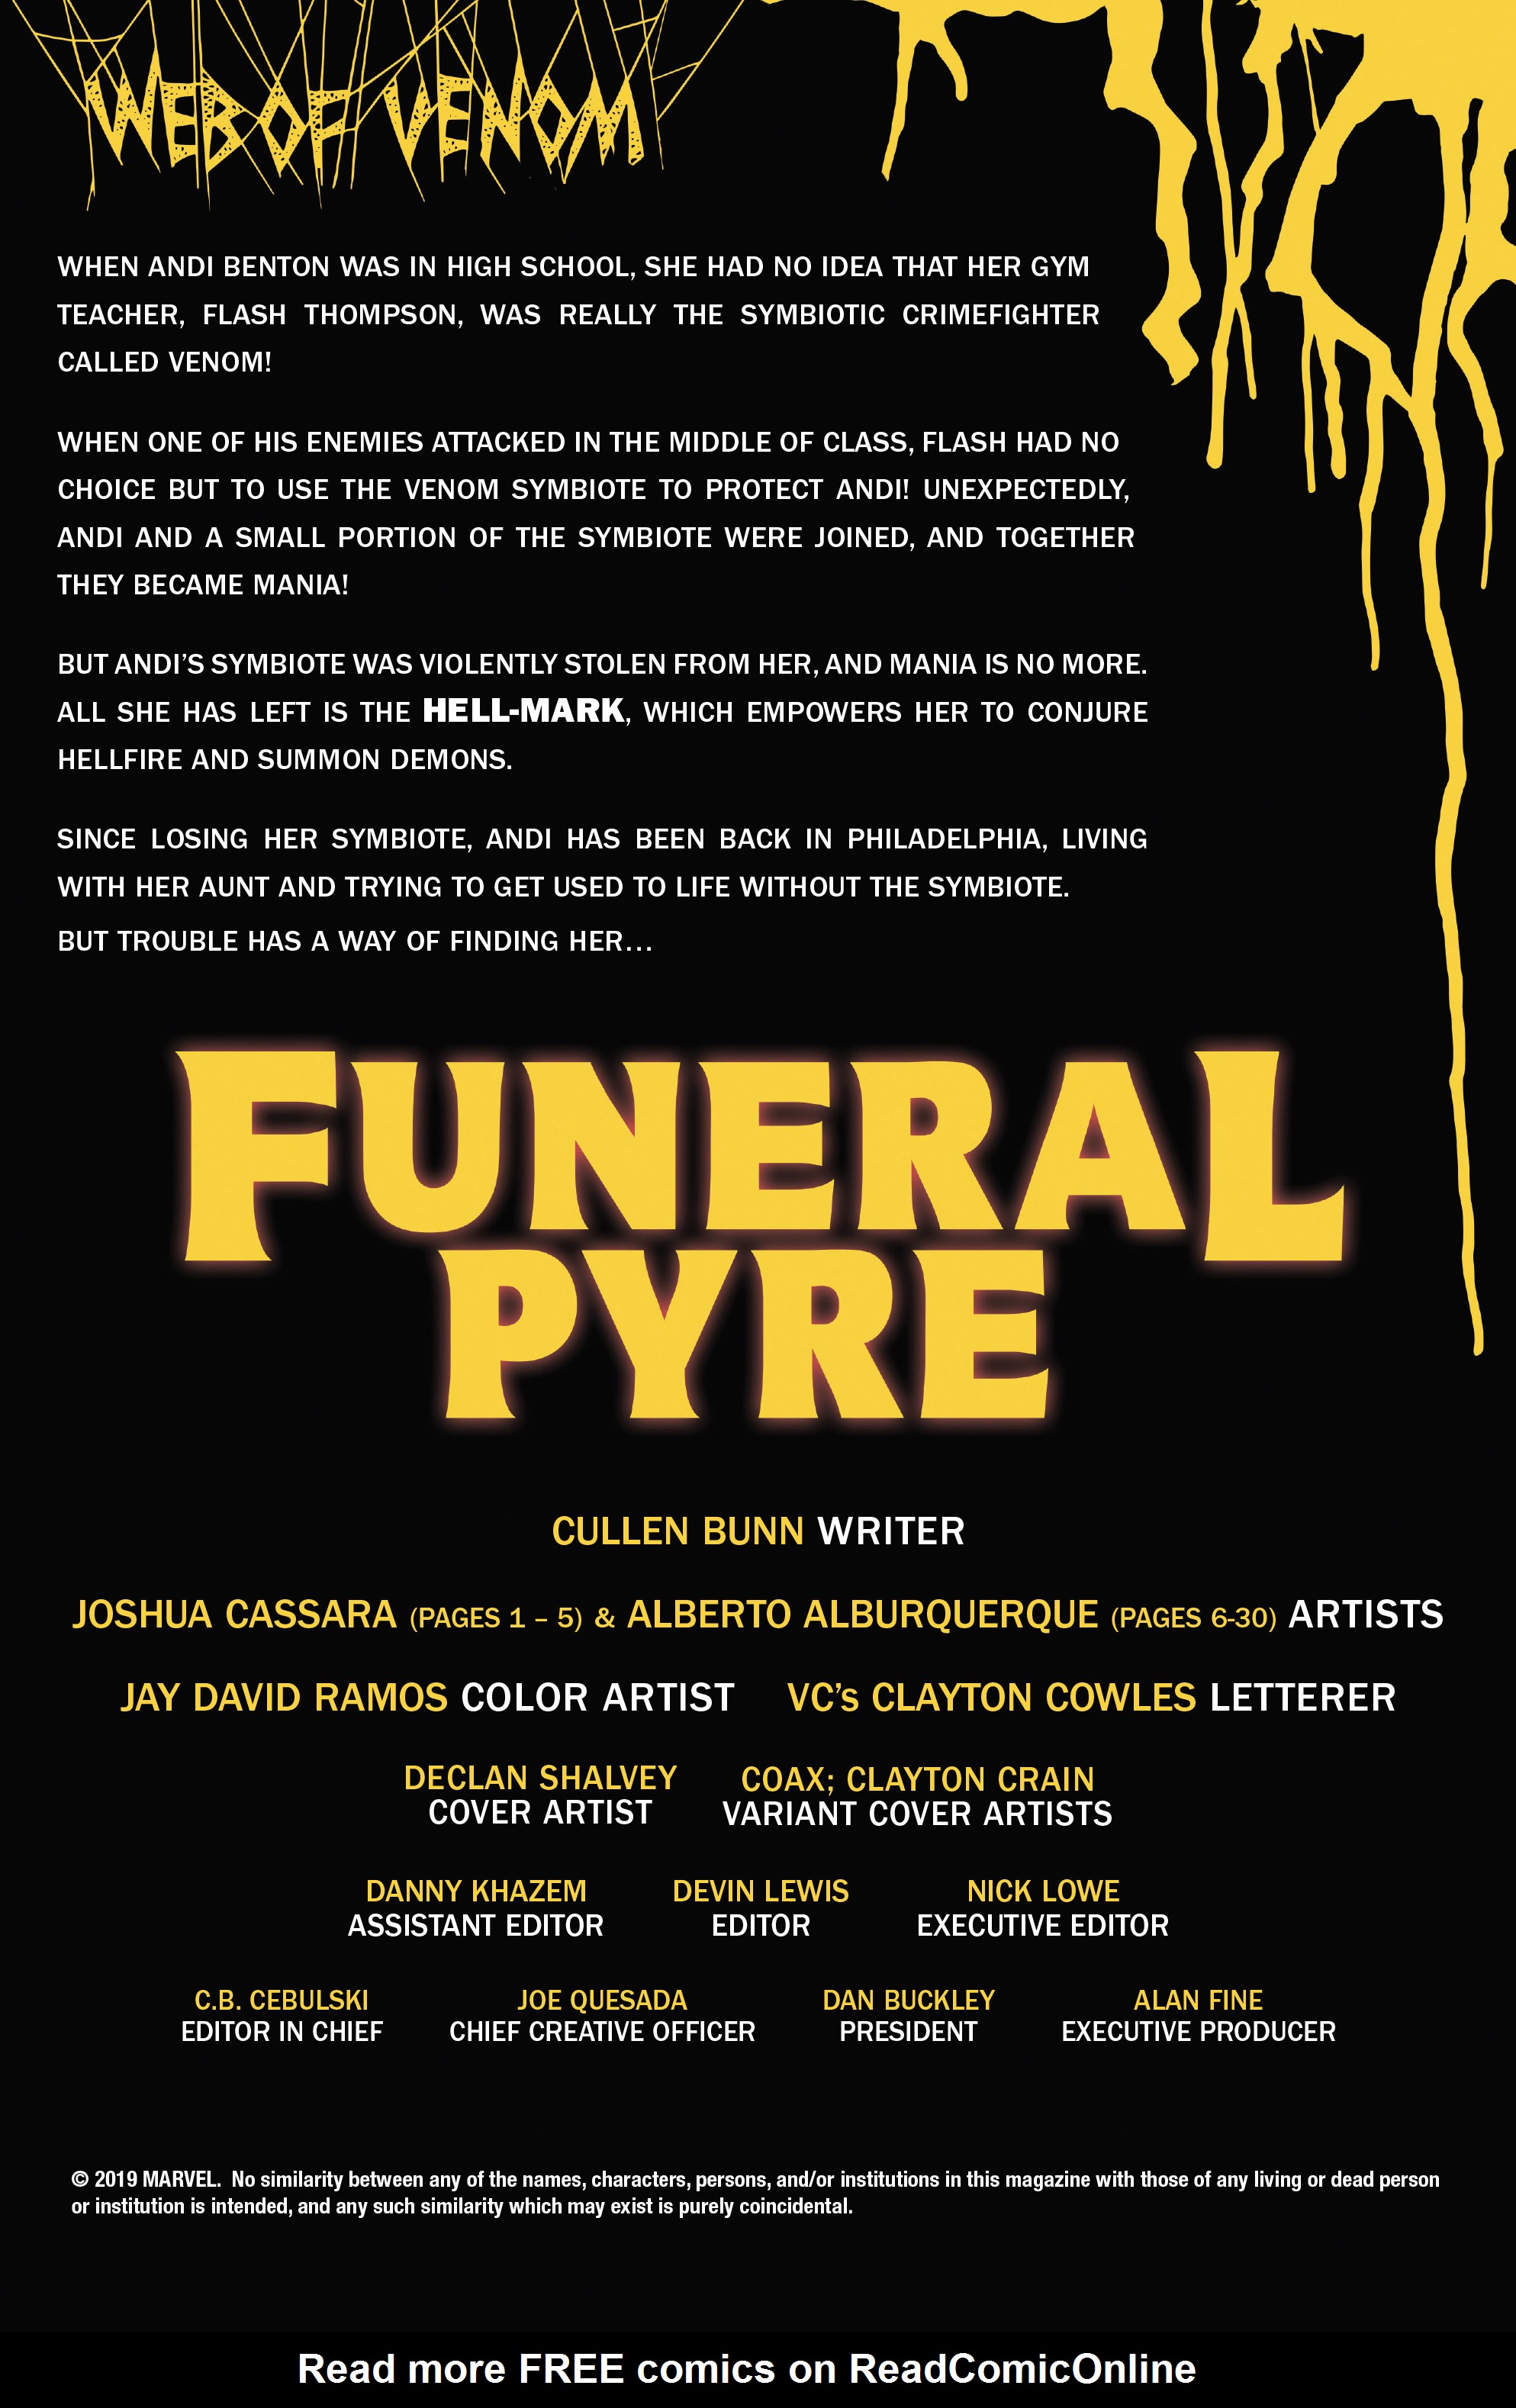 Read online Web of Venom: Funeral Pyre comic -  Issue # Full - 2